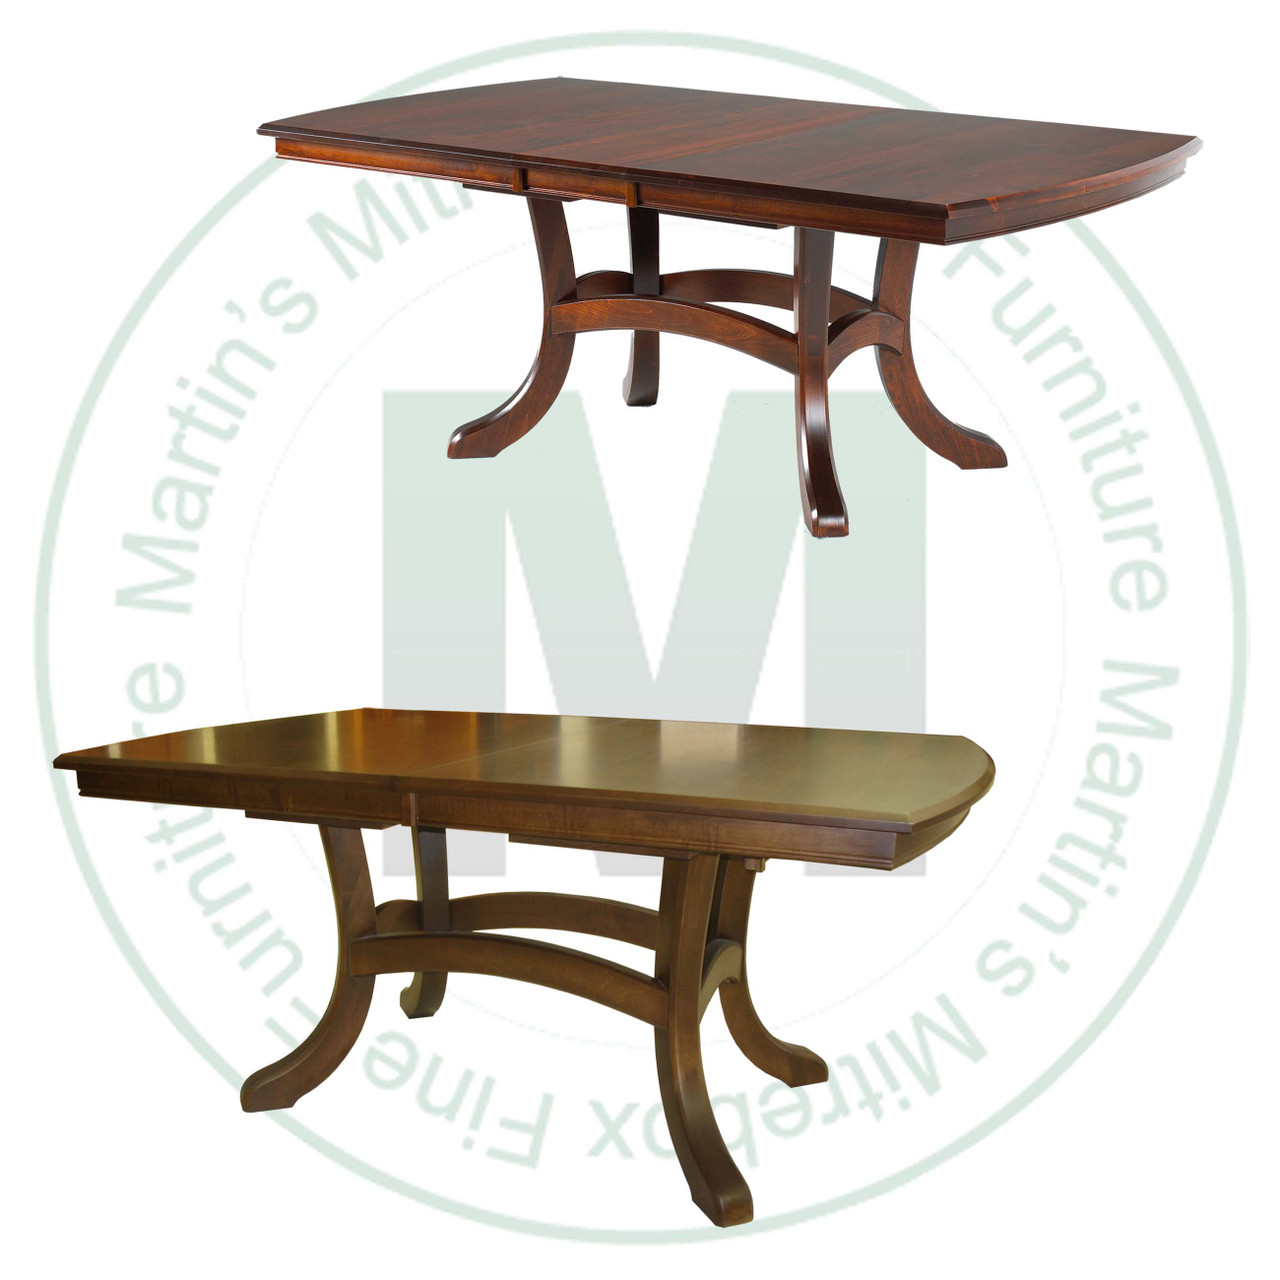 Oak Jordan Double Pedestal Table 42''D x 96''W x 30''H With 3 - 12'' Leaves. Table Has 1'' Thick Top